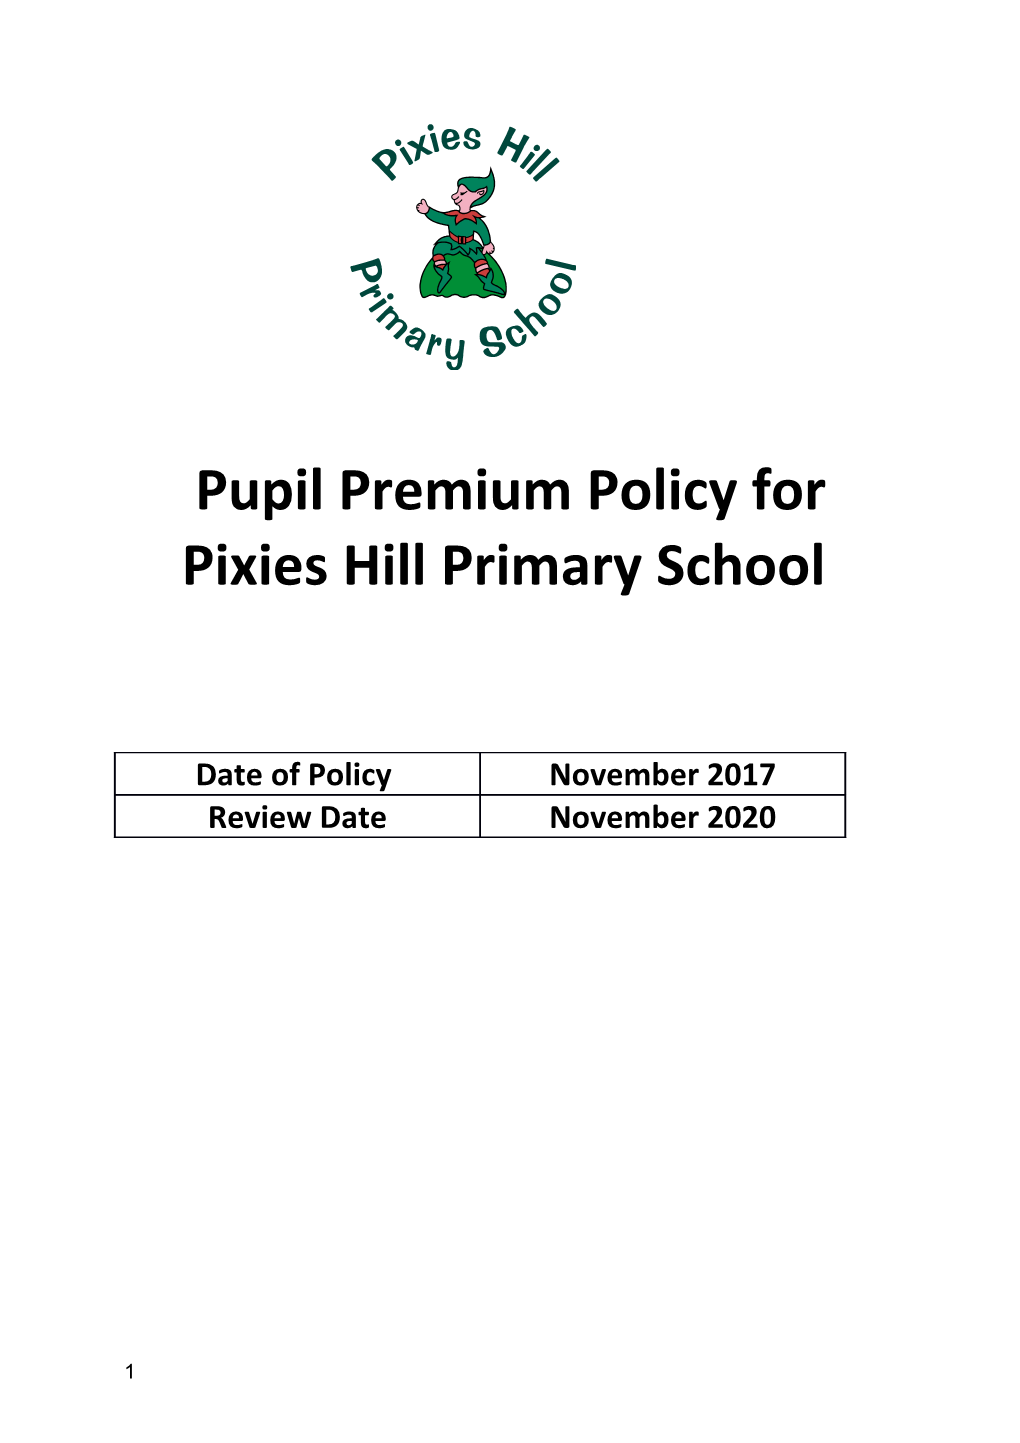 Pupil Premium Policy for Pixies Hill Primary School